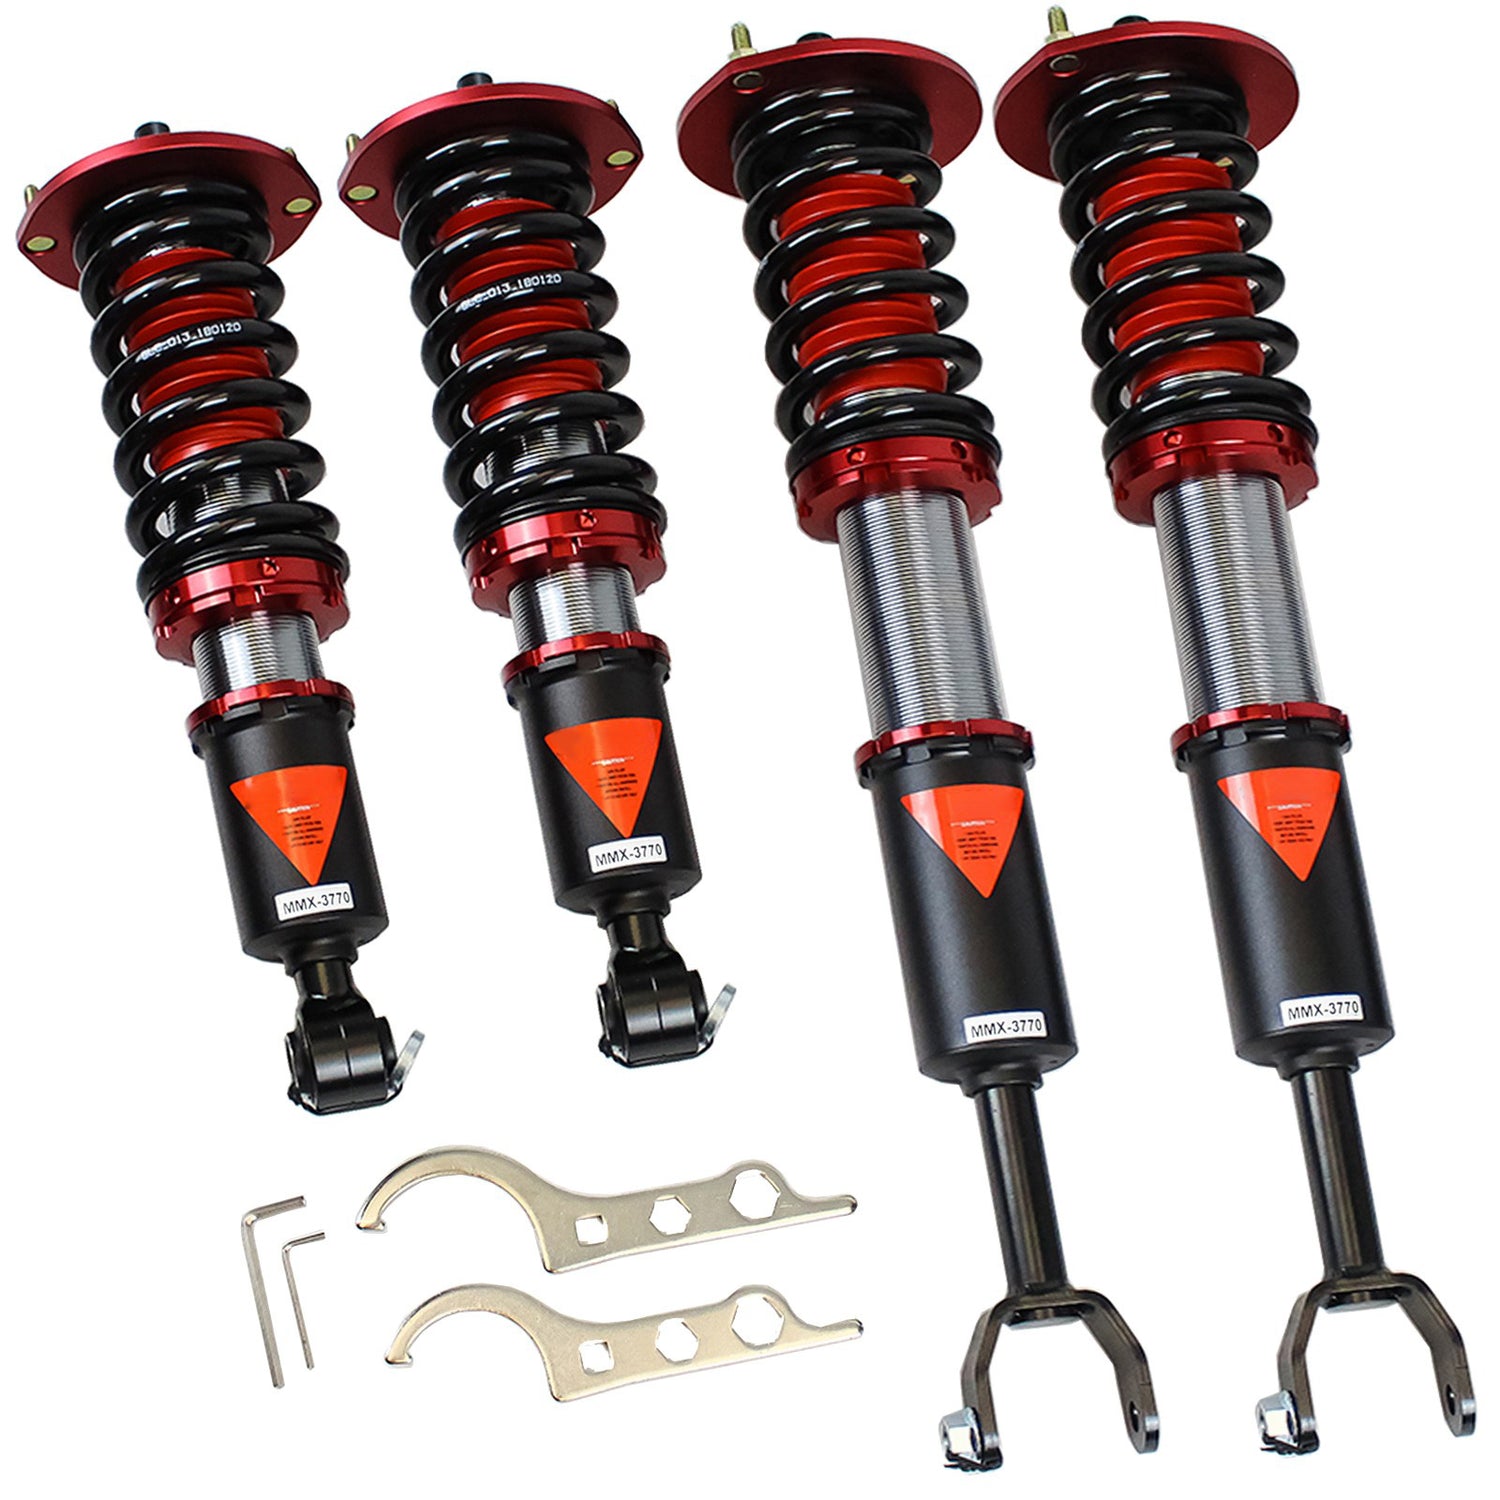 MMX3770-A MAXX Coilovers Lowering Kit, Fully Adjustable, Ride Height, 40 Clicks Rebound Settings, Nissan Skyline GT-R R33(BCNR33) 94-98